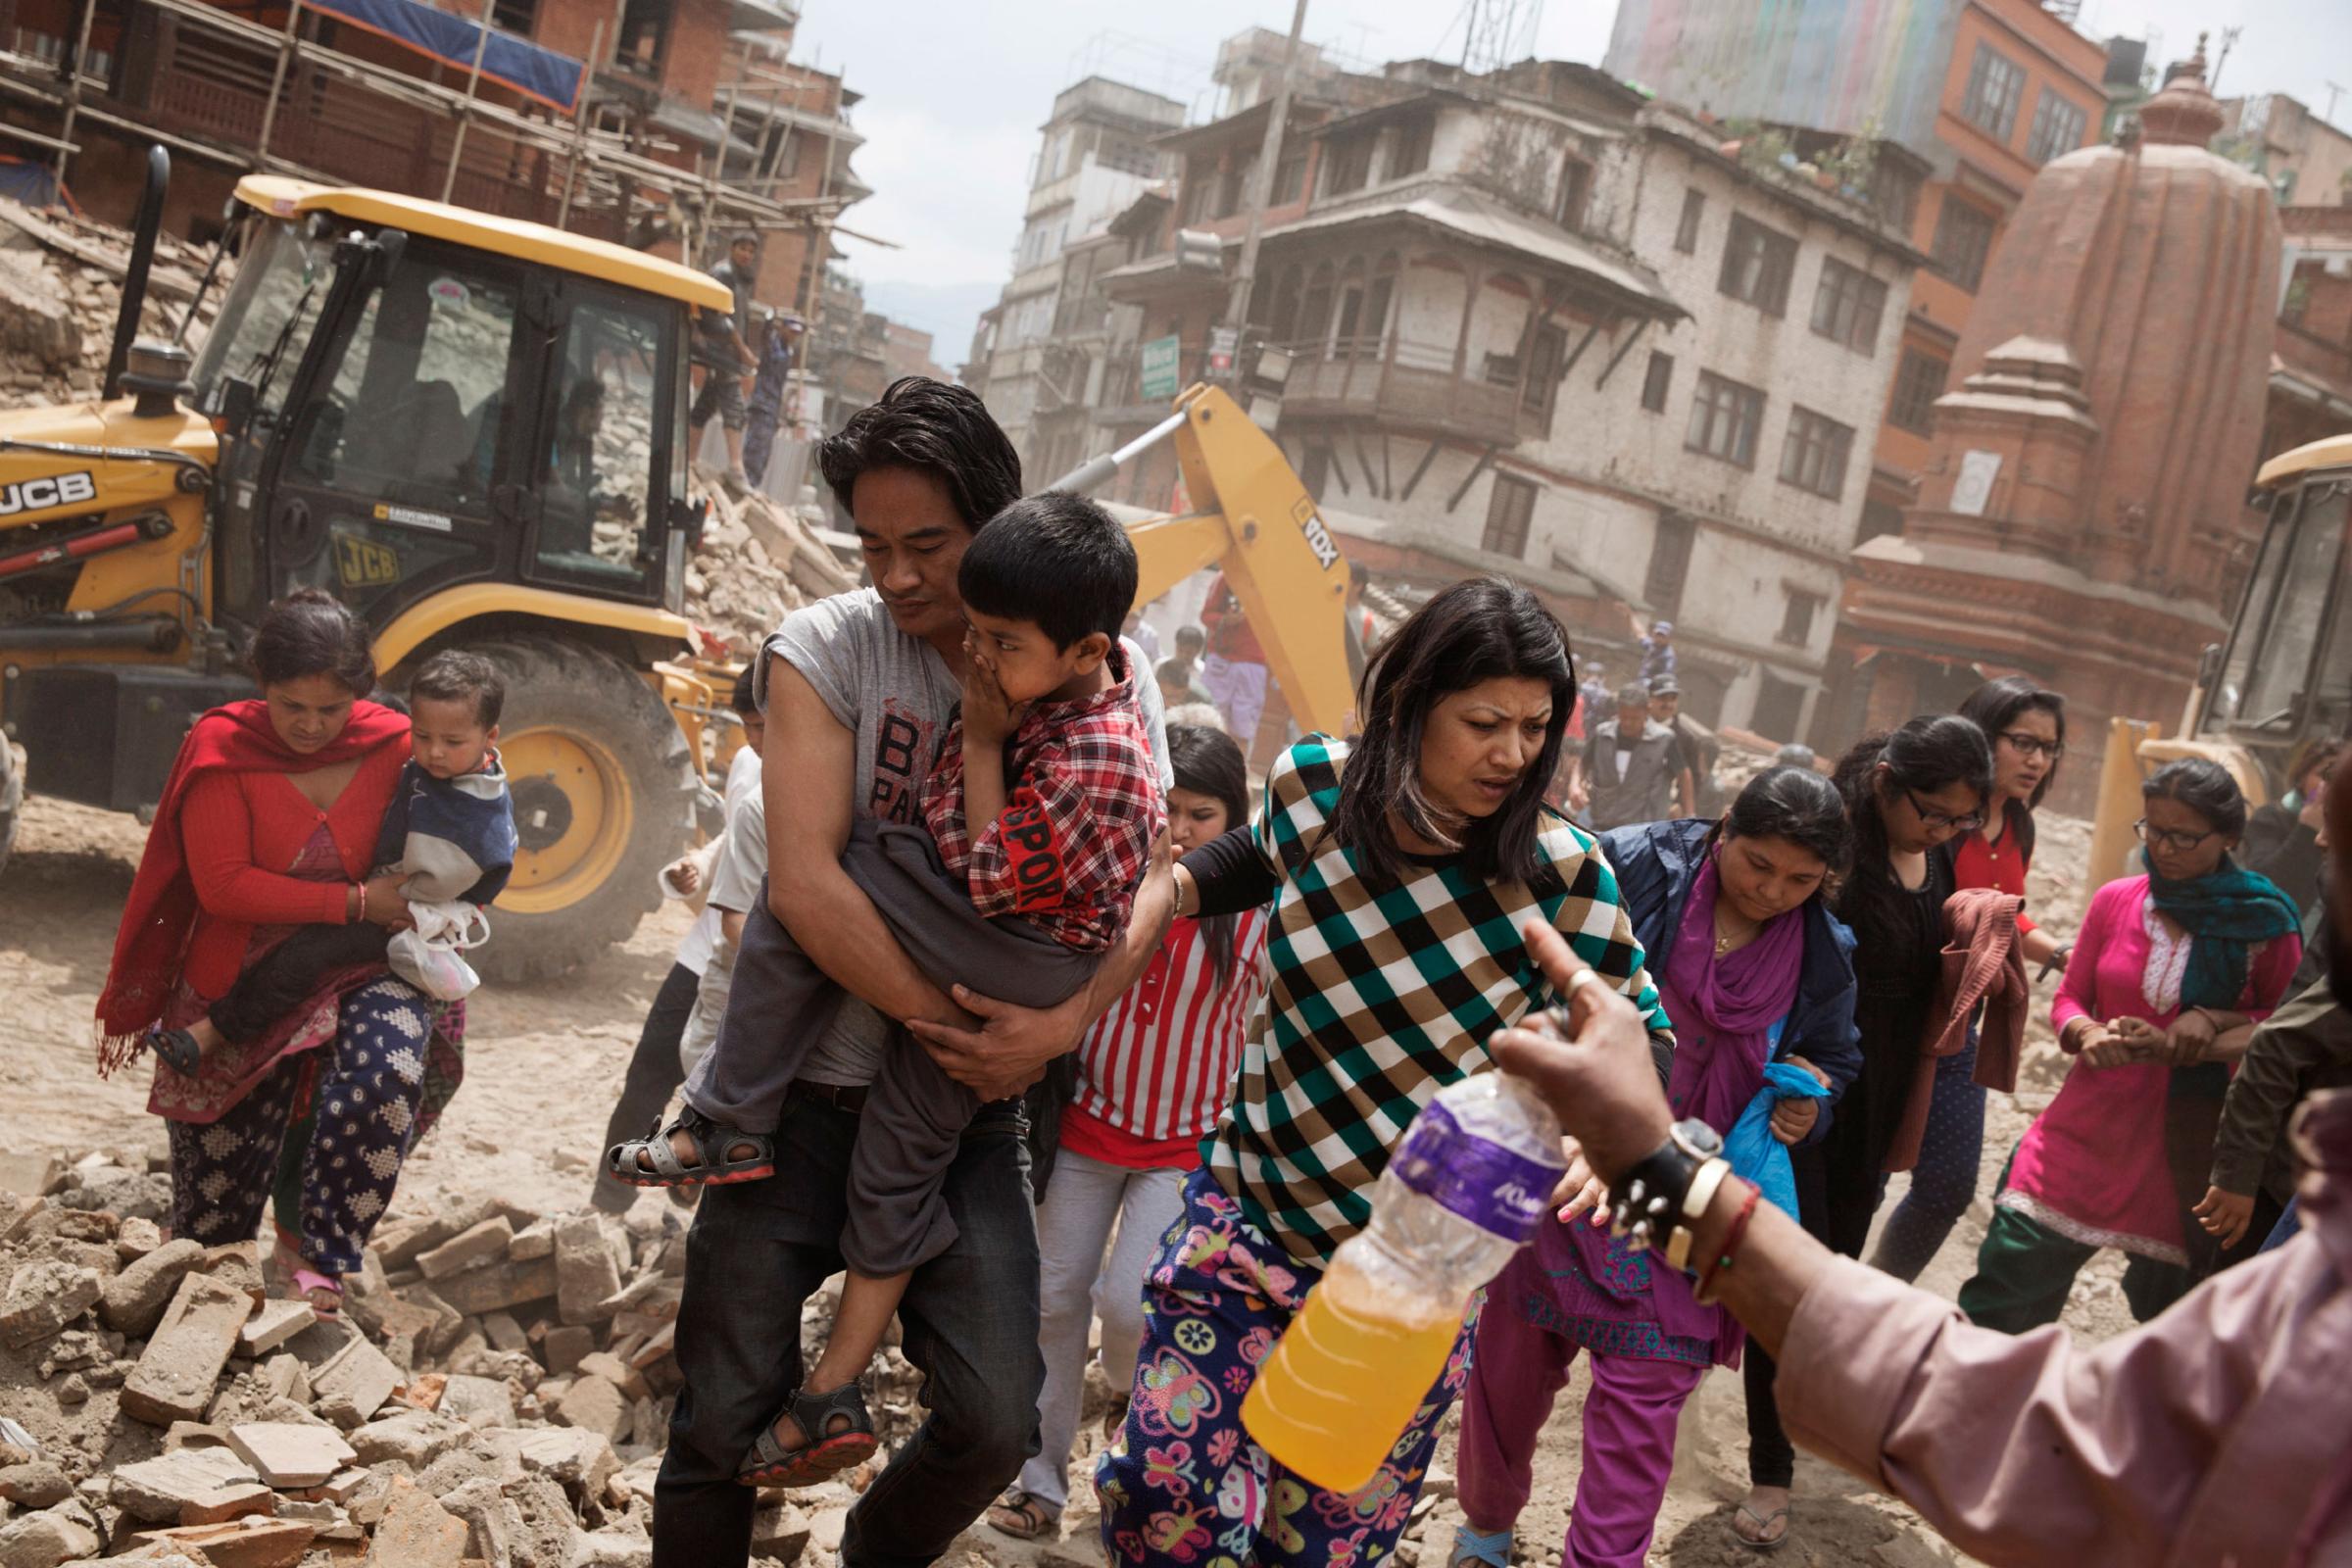 Nepali people flee buildings during an aftershock in Kathmandu, Nepal on April. 27, 2015. Nepal had a severe earthquake on April 25th. Photo by Adam Ferguson for Time